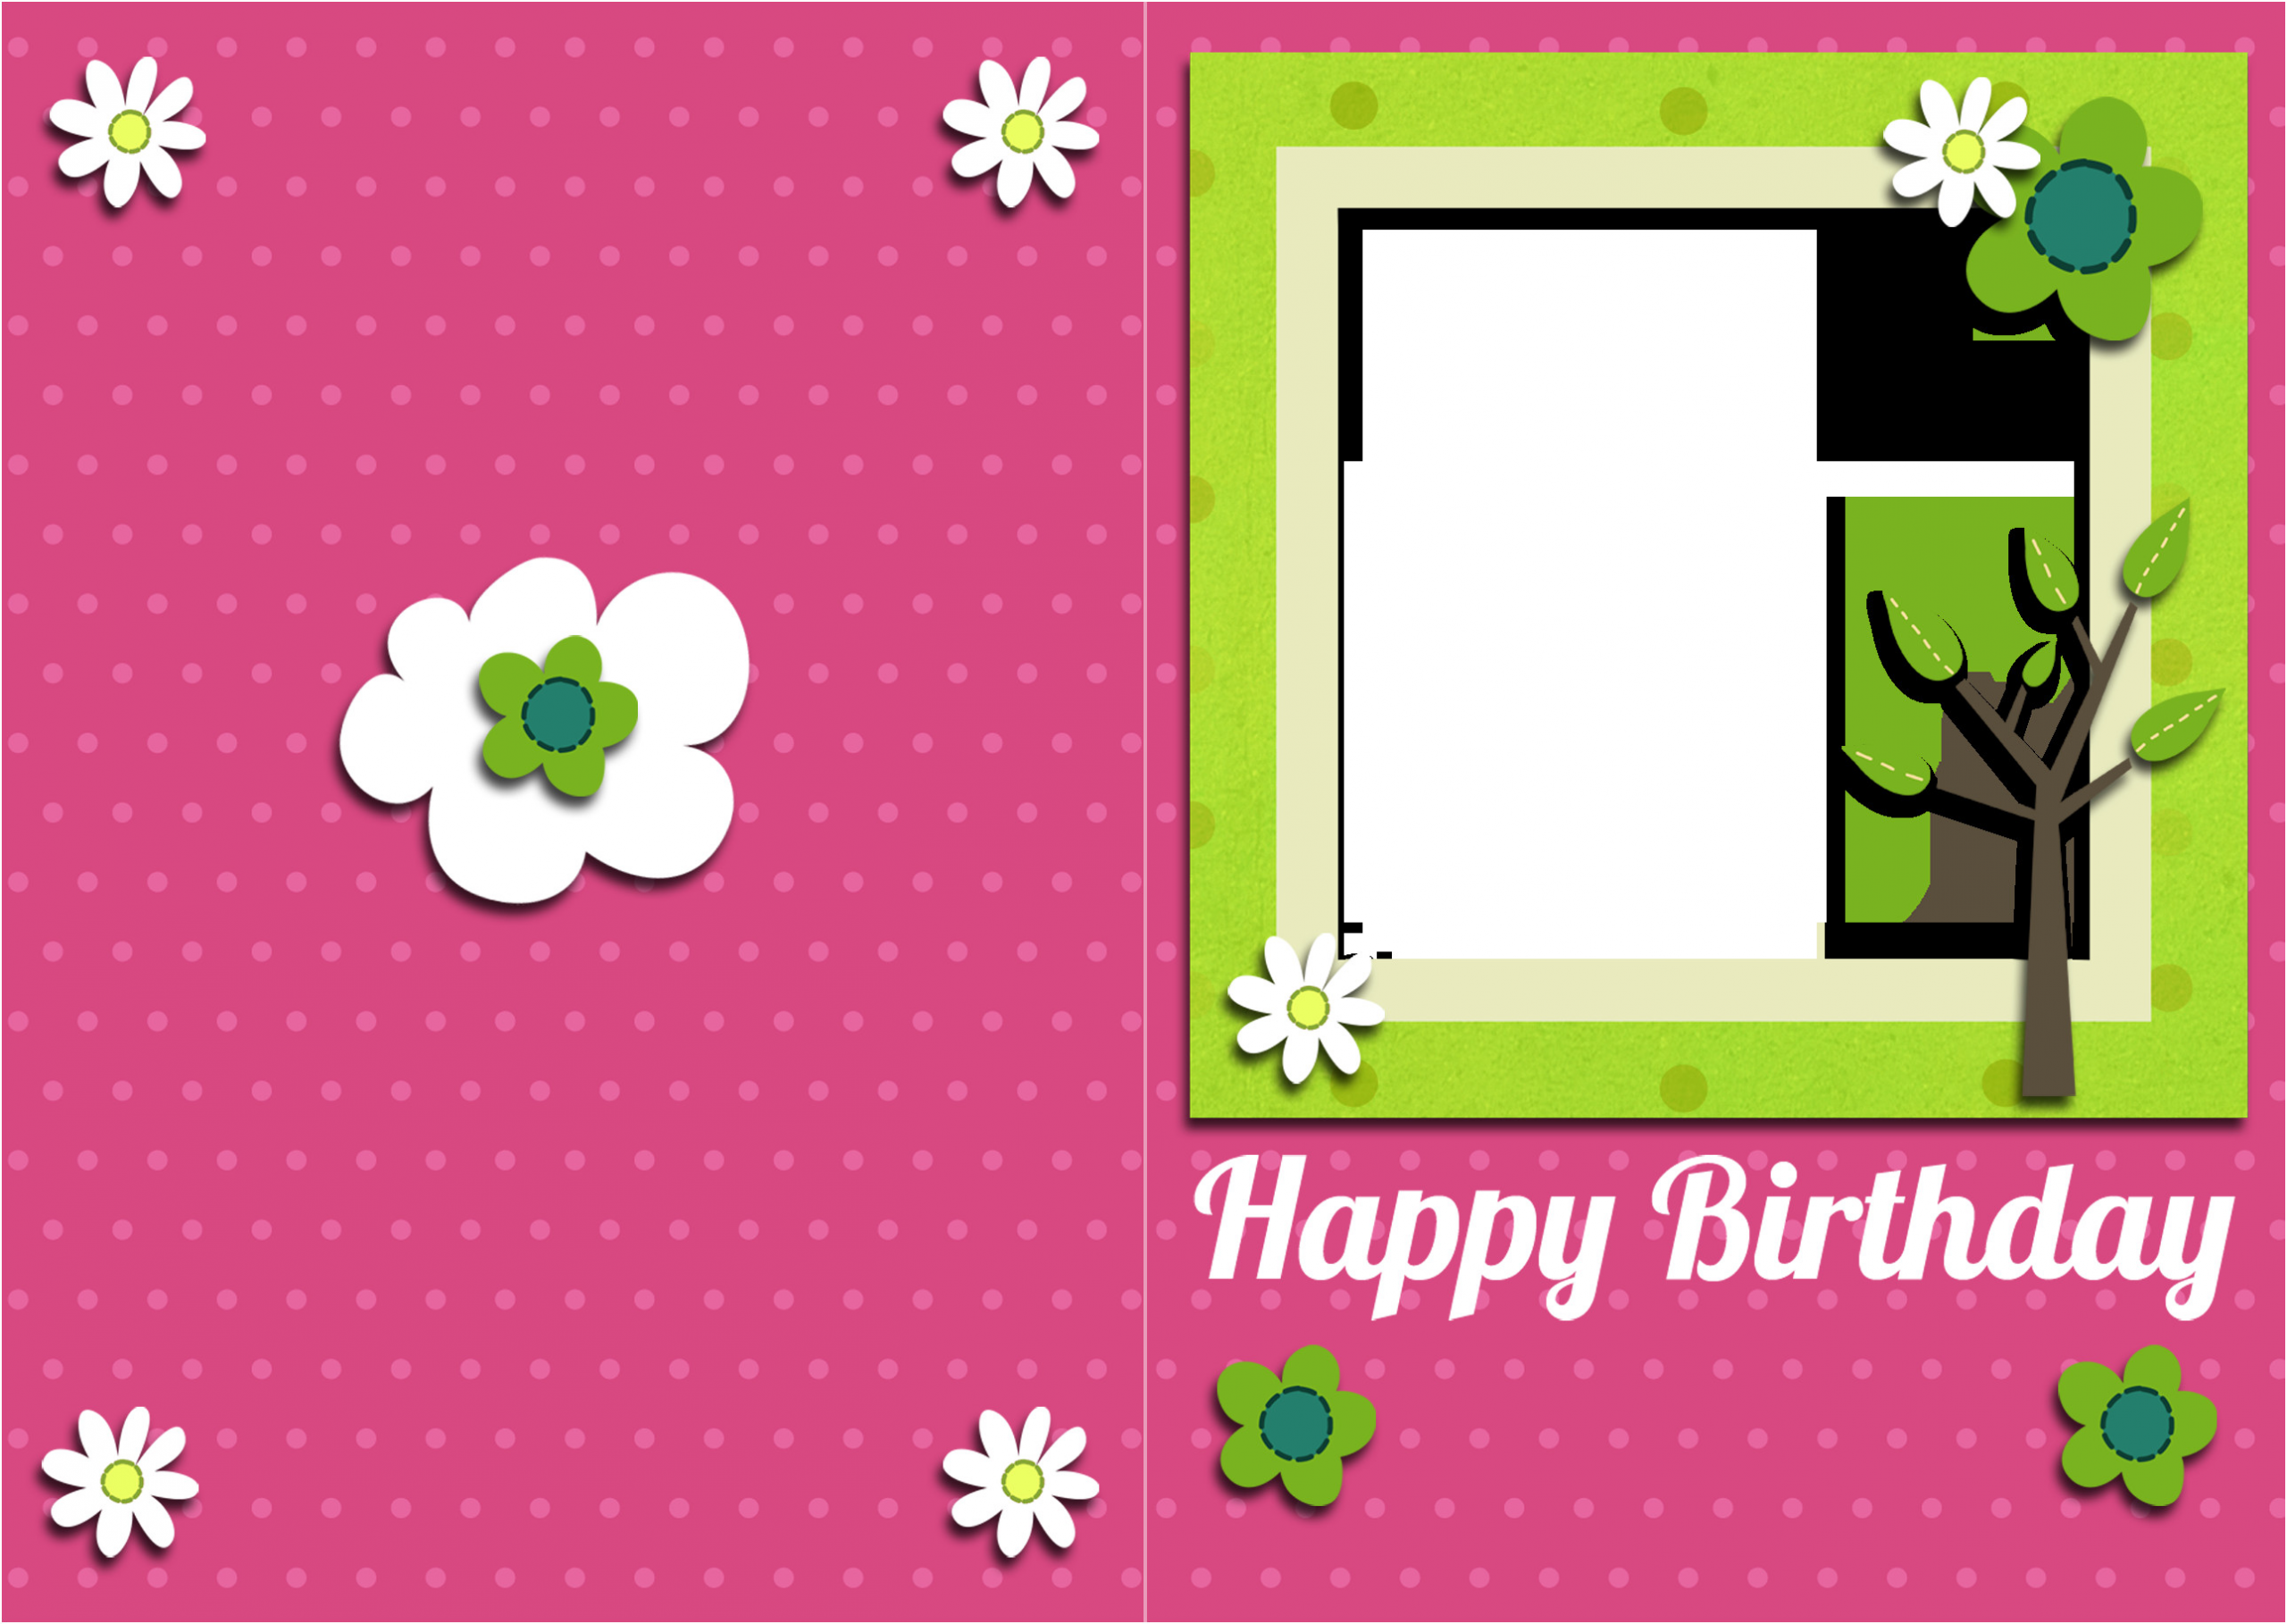 Happy Birthday Card Printable
 35 Happy Birthday Cards Free To Download – The WoW Style